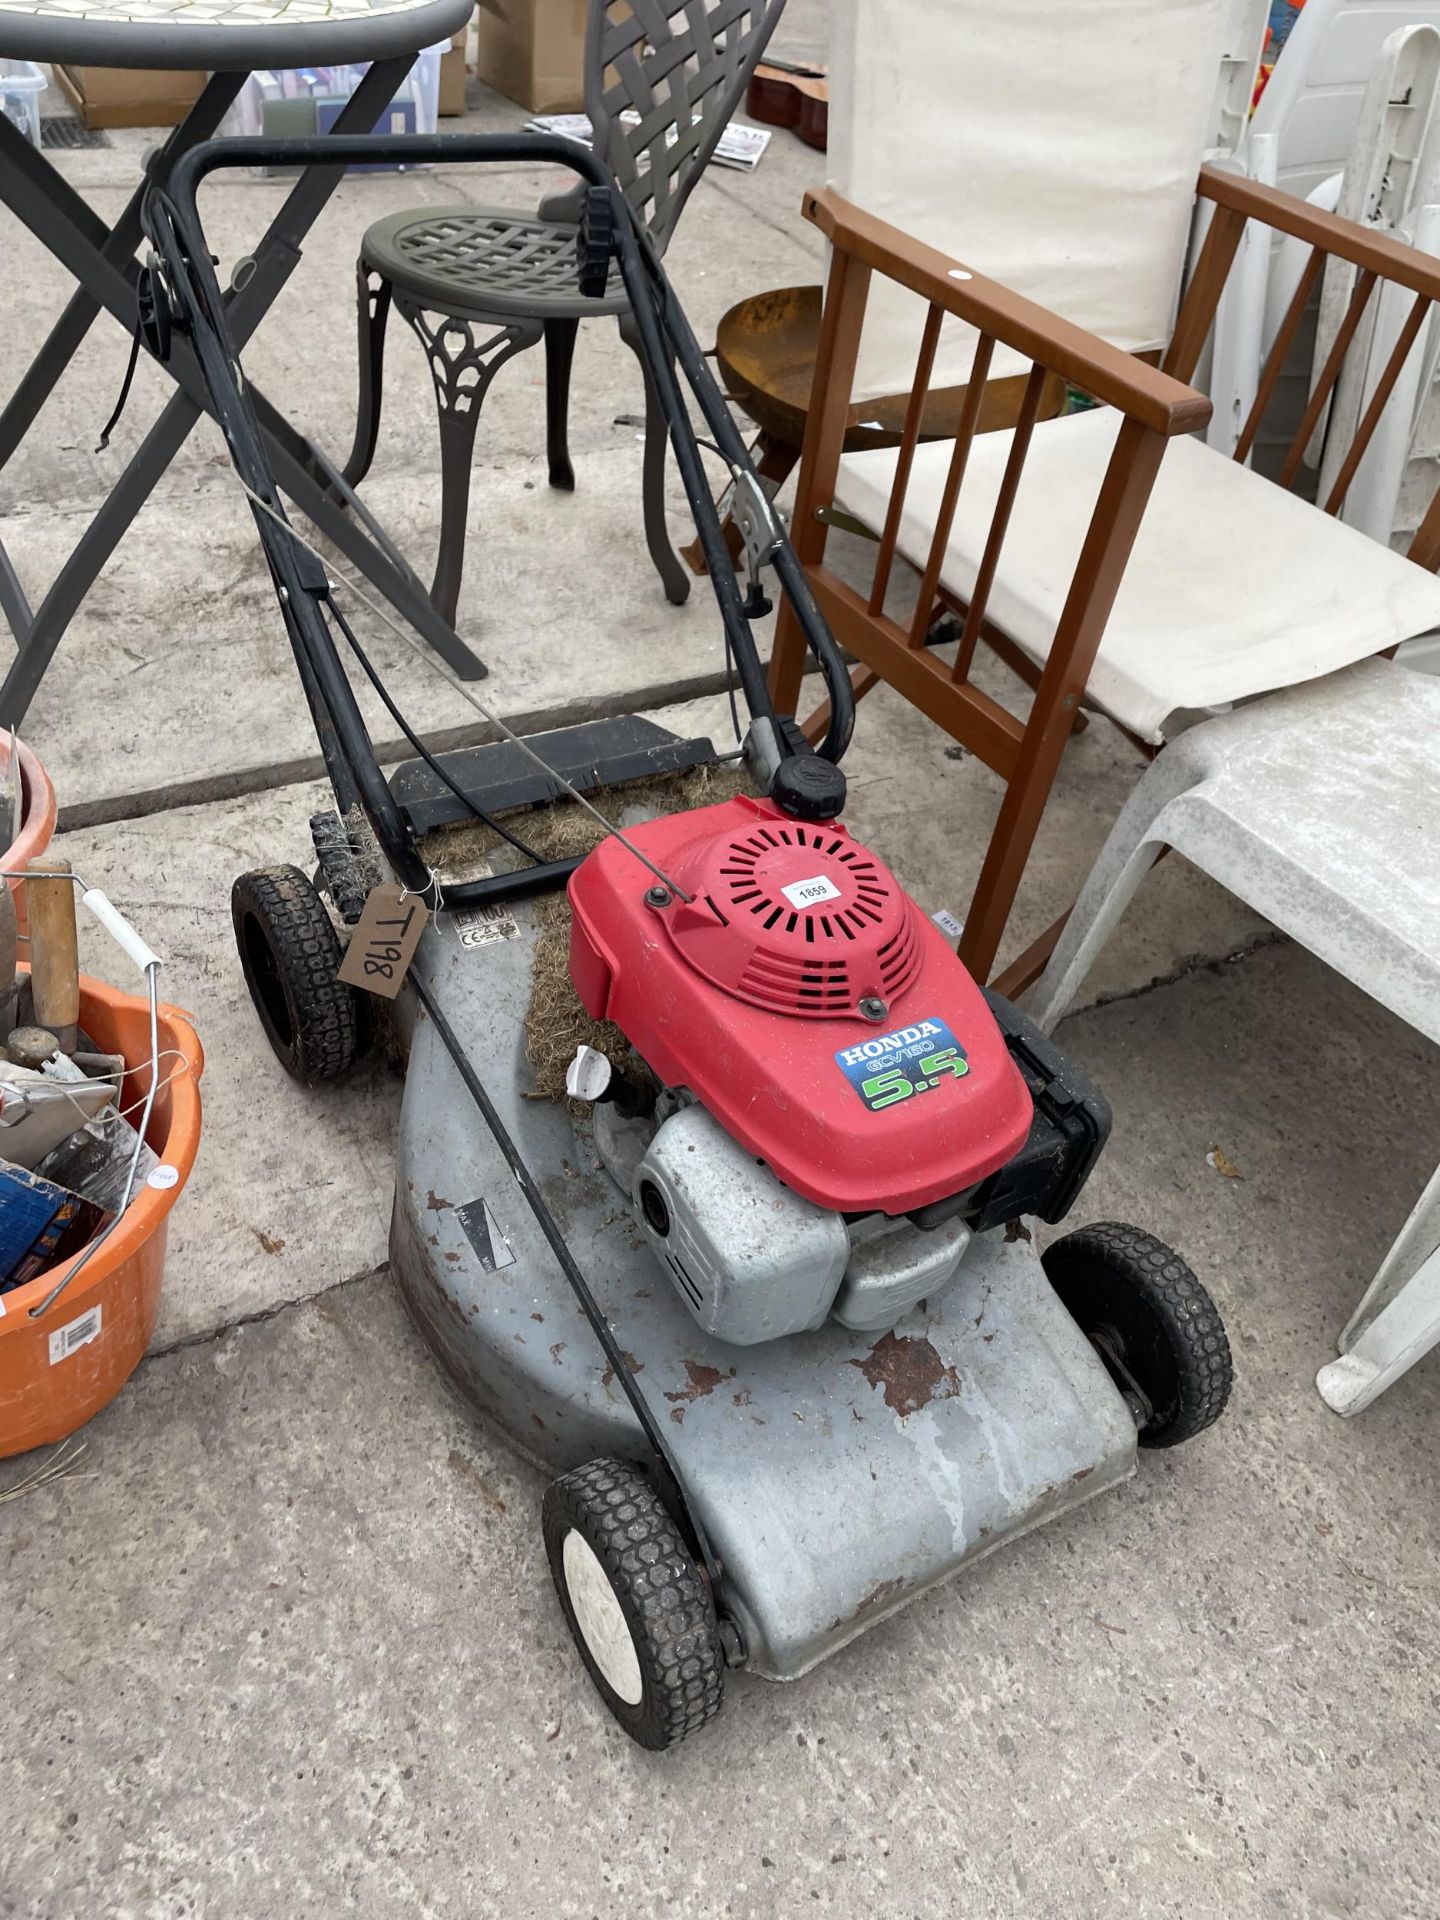 A HONDA GCV160 ROTARY LAWN MOER (A/F HOLE IN THE DECK)